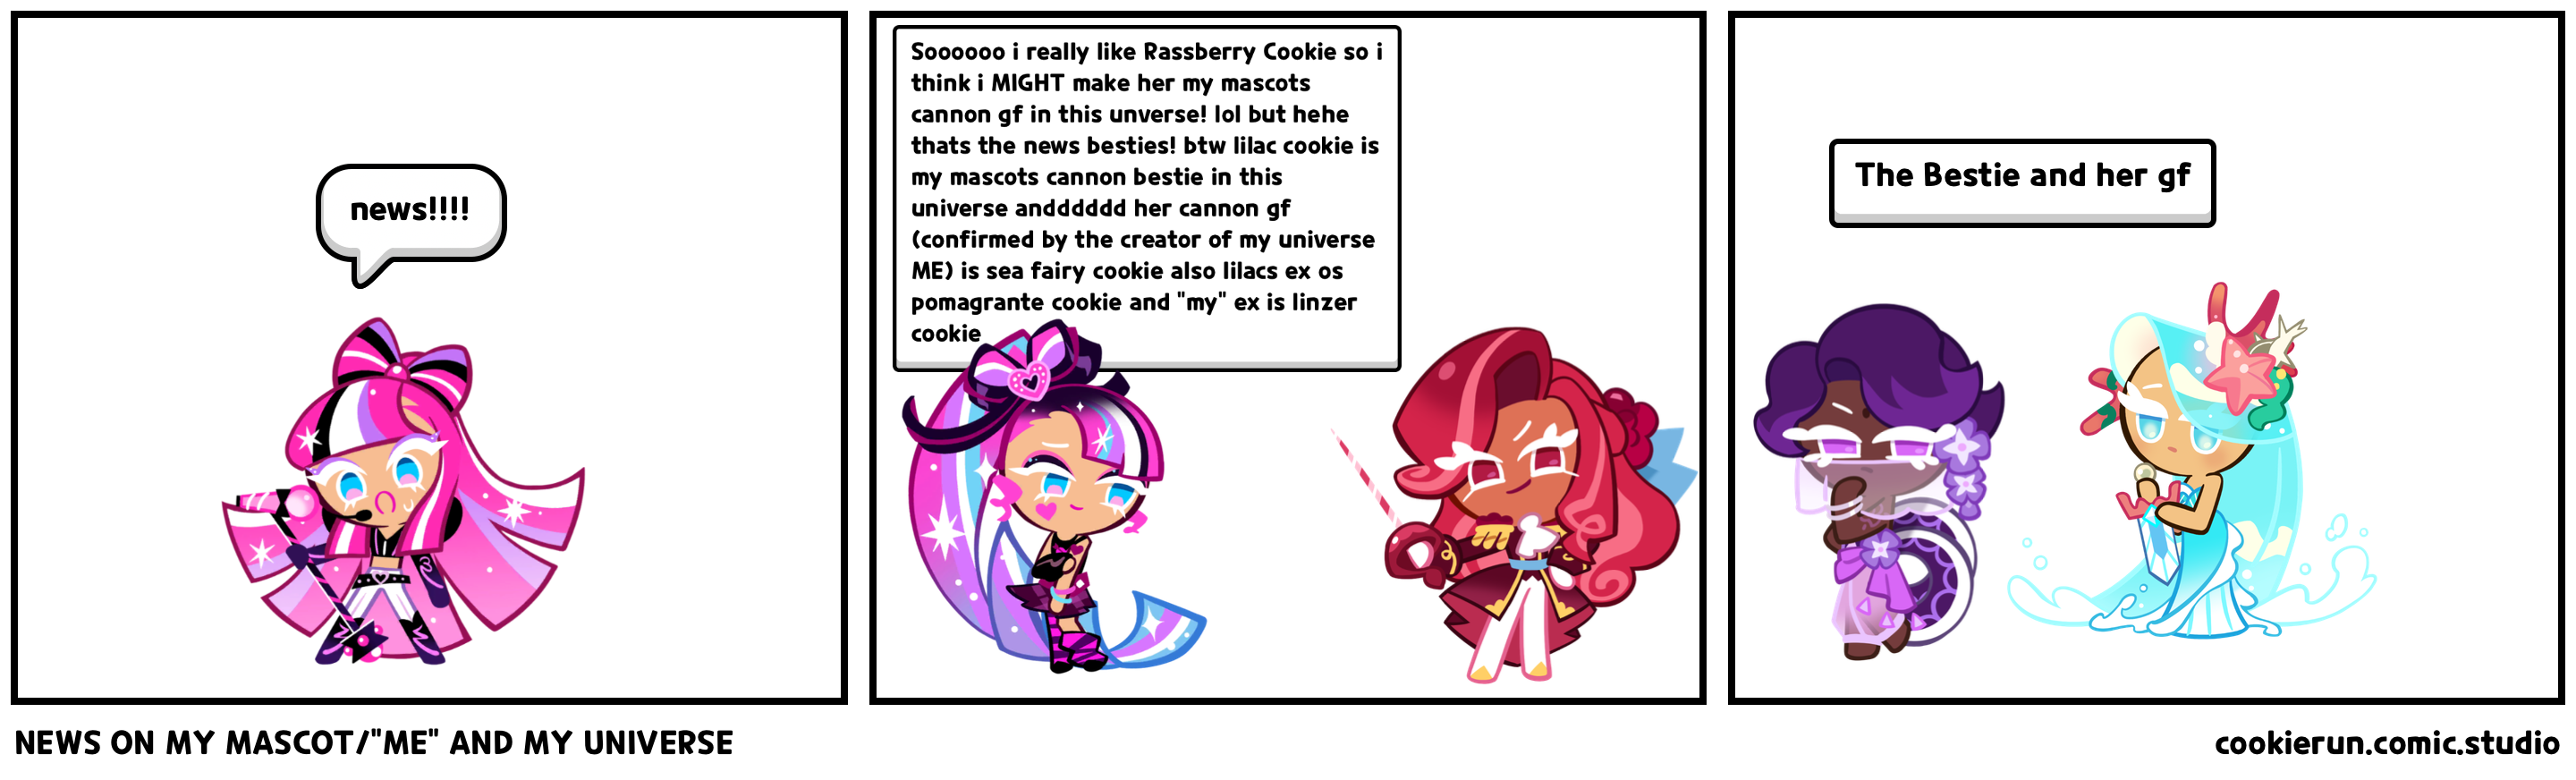 NEWS ON MY MASCOT/"ME" AND MY UNIVERSE